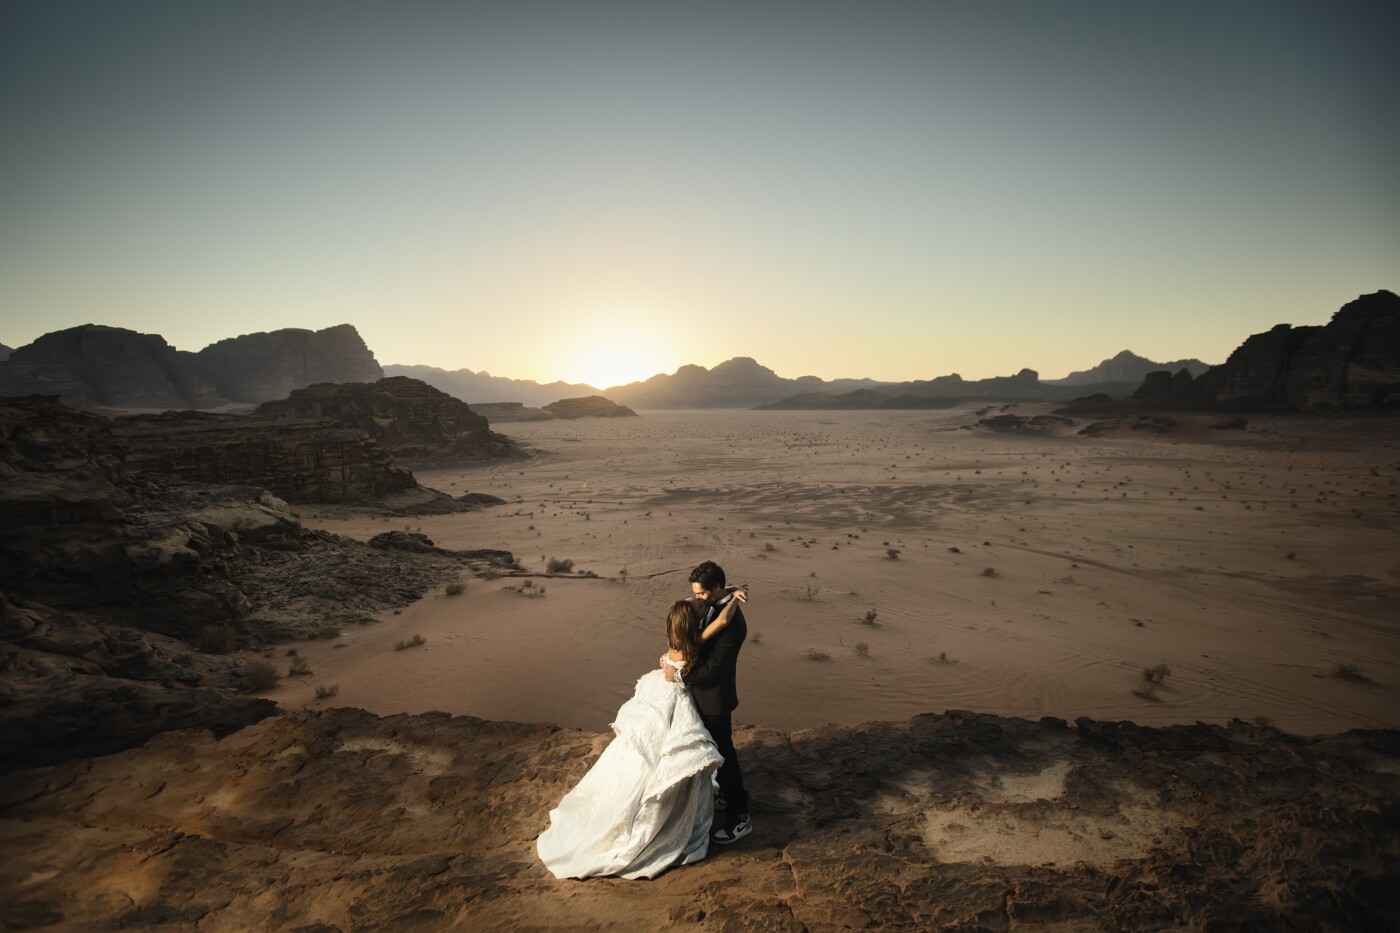 Wadi rum in Jordan is one of the most beautiful natural places on earth. It's not surprising that most sci-fi movies that are set on Mars end up being shot there. It has an other-worldly look and feel to it. I have been trying to convince a couple to come with me on this shoot for a little over a year. Wadi Rum is a 3.5 HR drive away from the capital Amman and deep In the desert. The mountains and rock formations are not exactly an ideal situation for a bride in high heels and a mobility hindering wedding dress.But luckily, Farah and Bilal were as excited about this as I was and equally as crazy. The entire experience was a lot of fun. One glorious thing about the area is the endless blanket of stars and that was something that we had to capture. The bride was such a rockstar because it got extremely cold at night and desert cold is dry and goes through the bone, but she pushed through it until we got what we wanted.